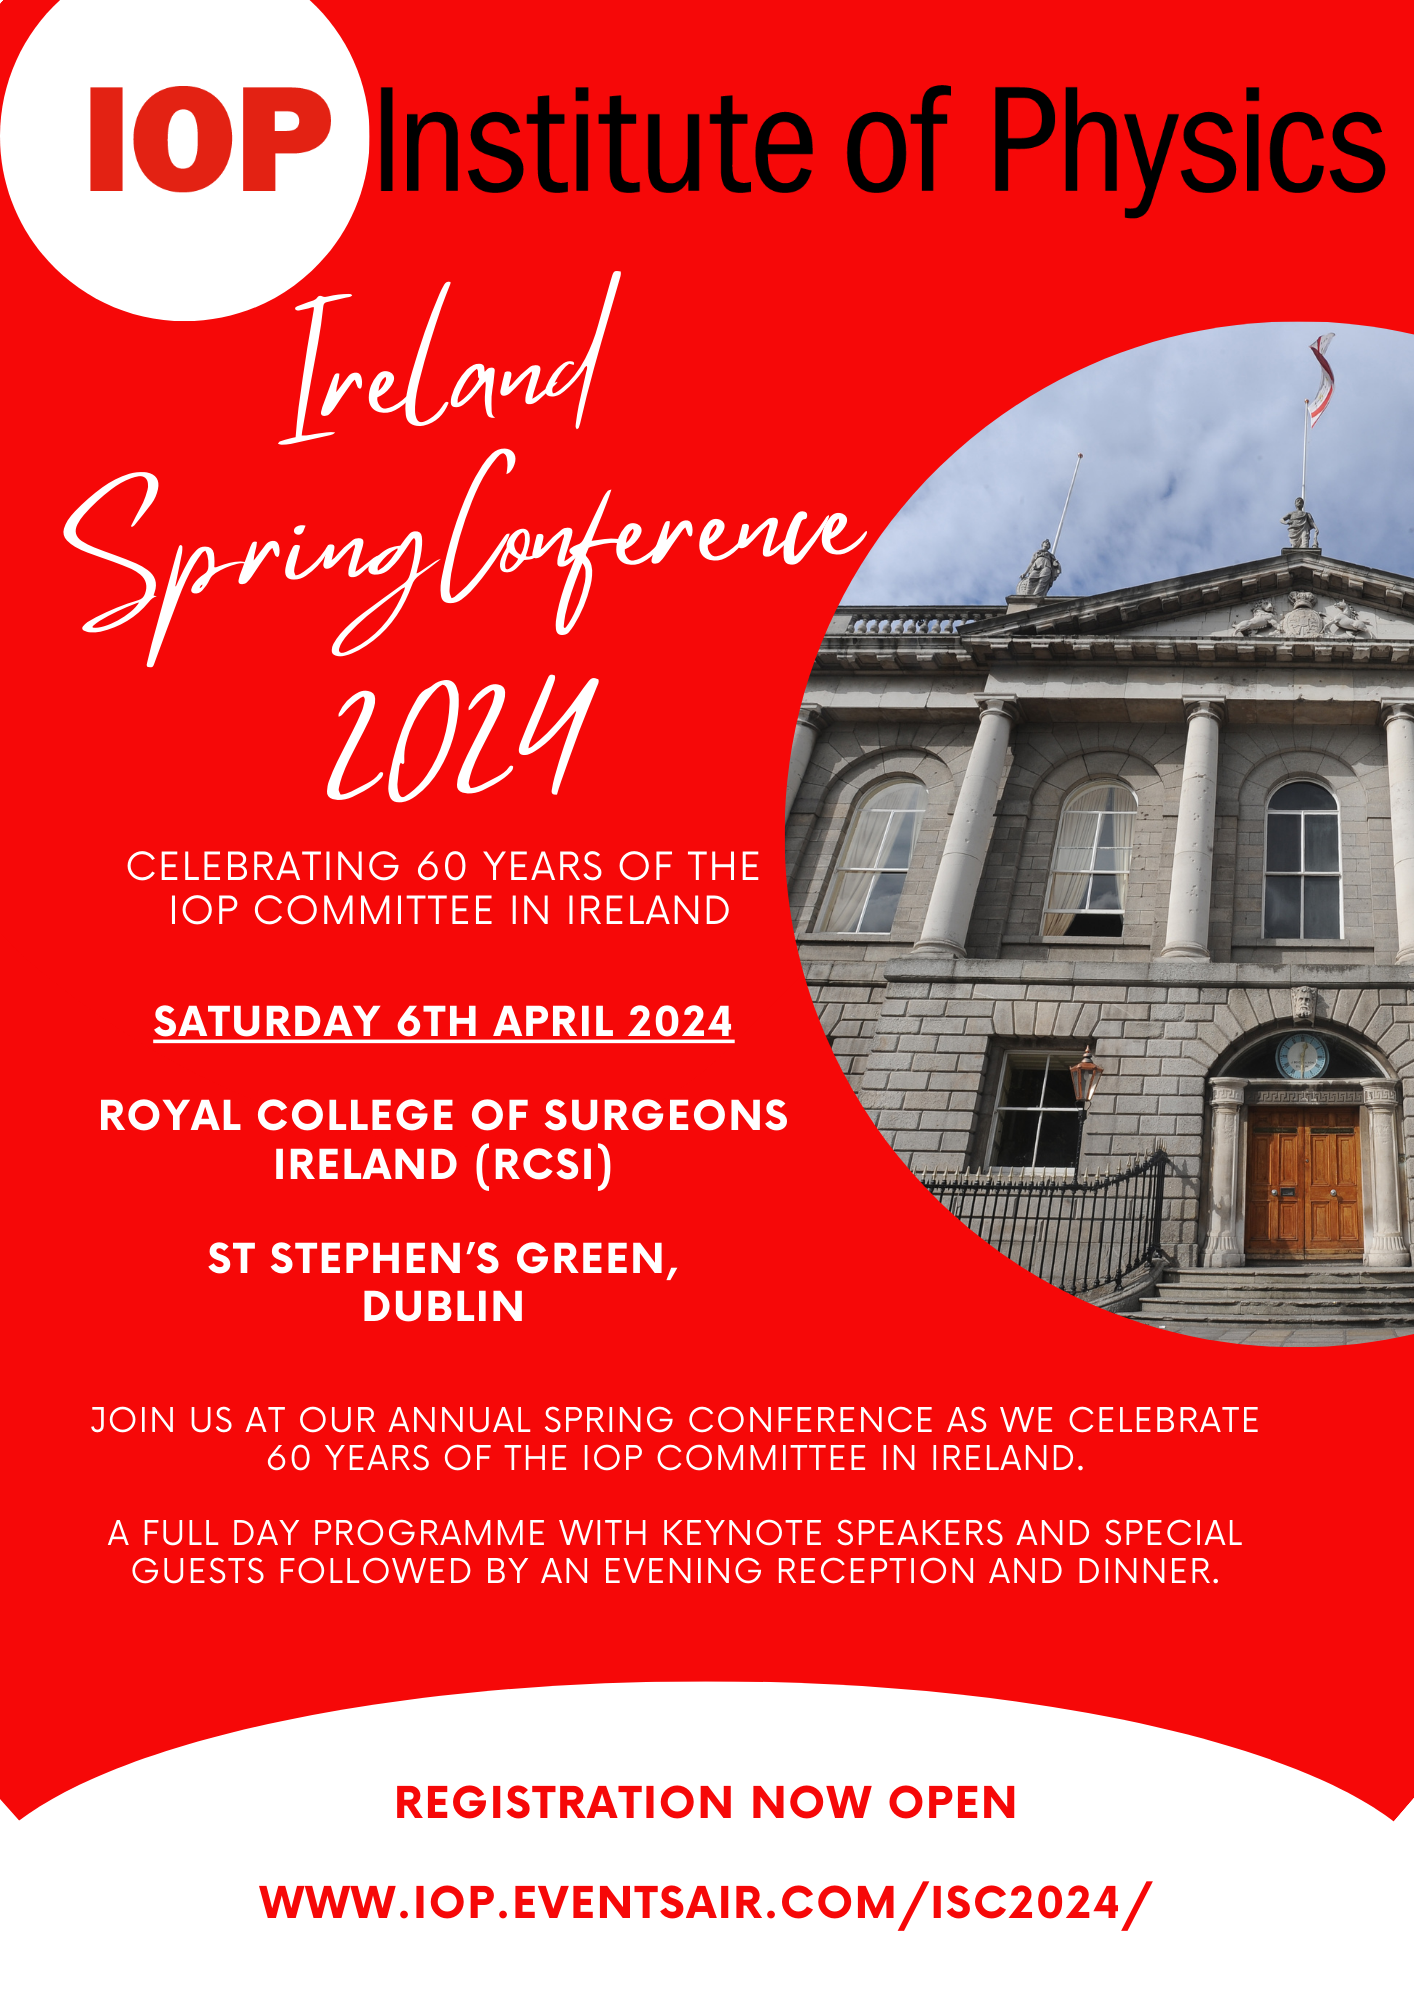 IOP Flyer for Spring Conference 2024 - image, text and registration link